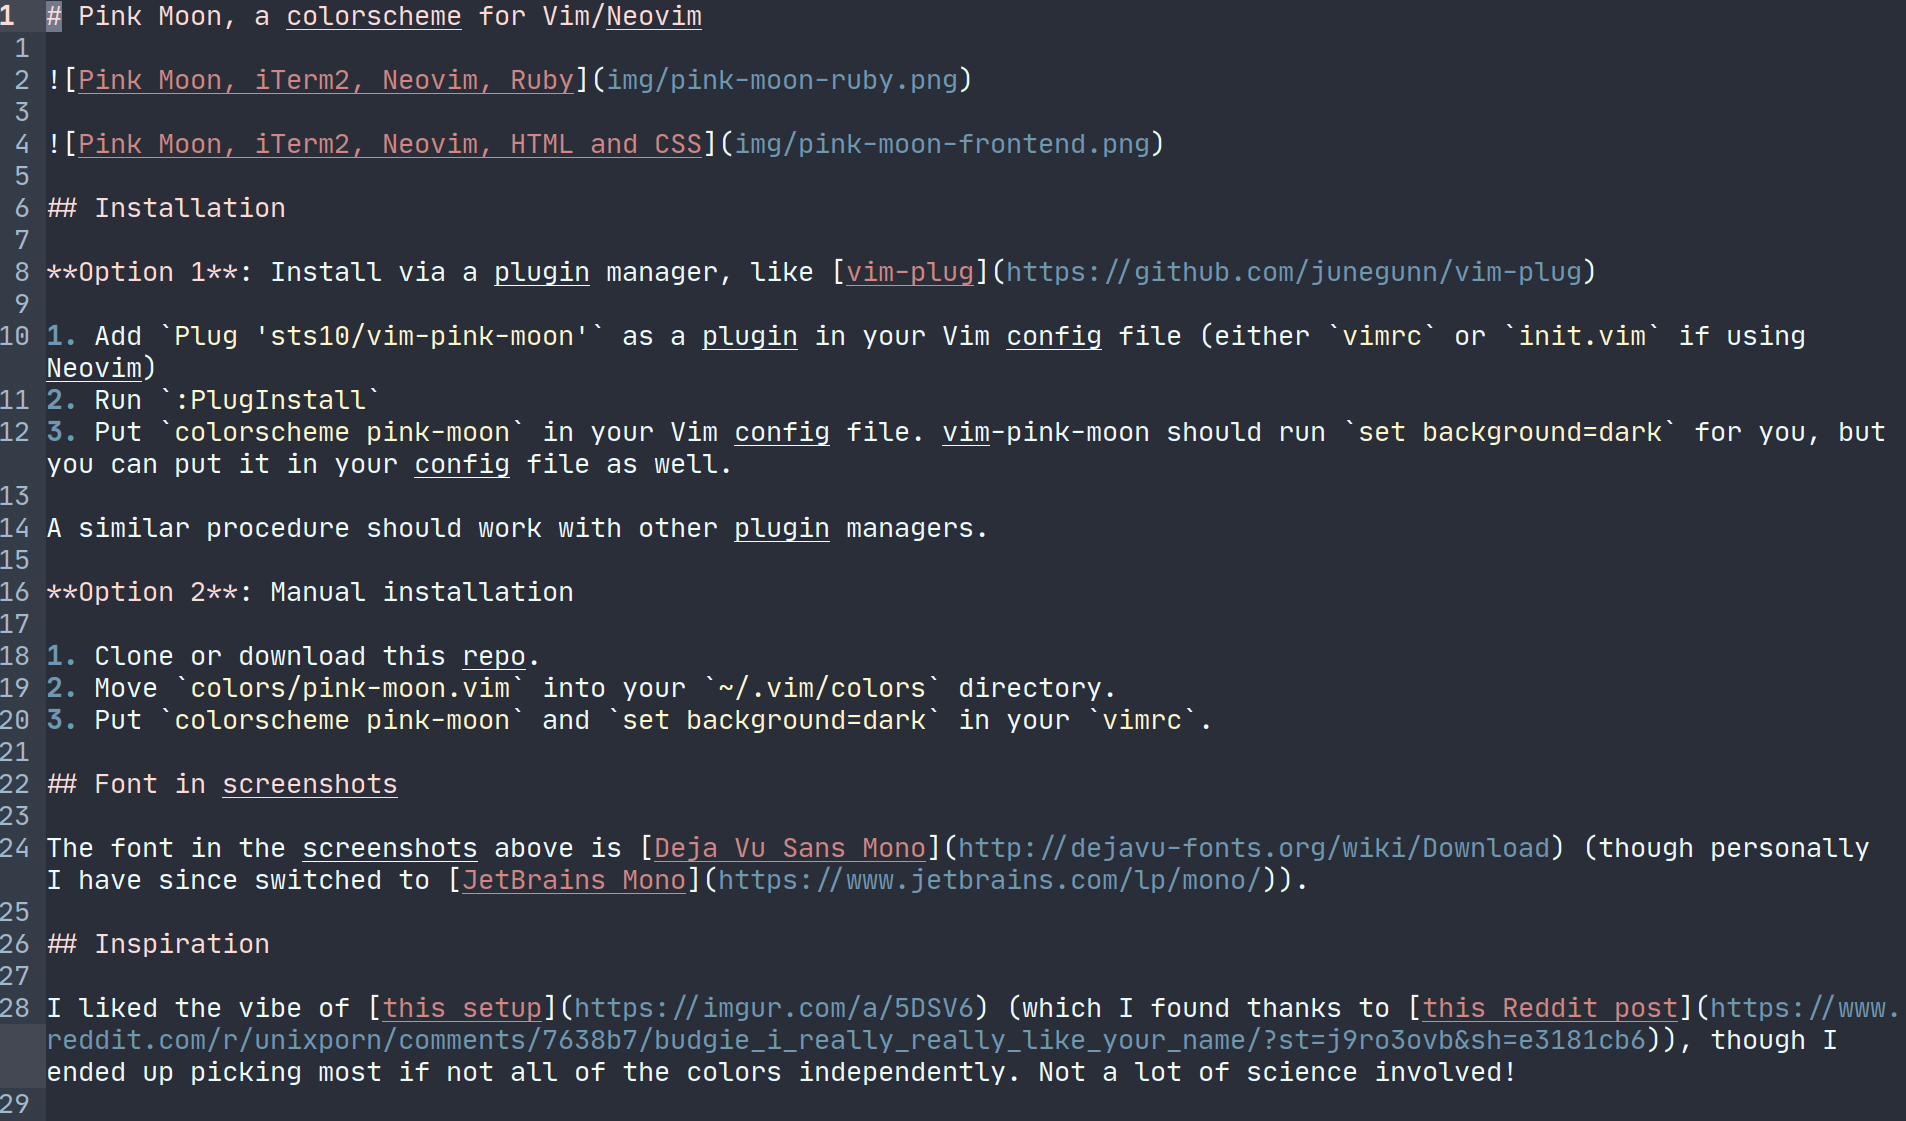 A screenshot of some Ruby code, as color-highlighted by the Pink Moon colorscheme, using the font JetBrains Mono